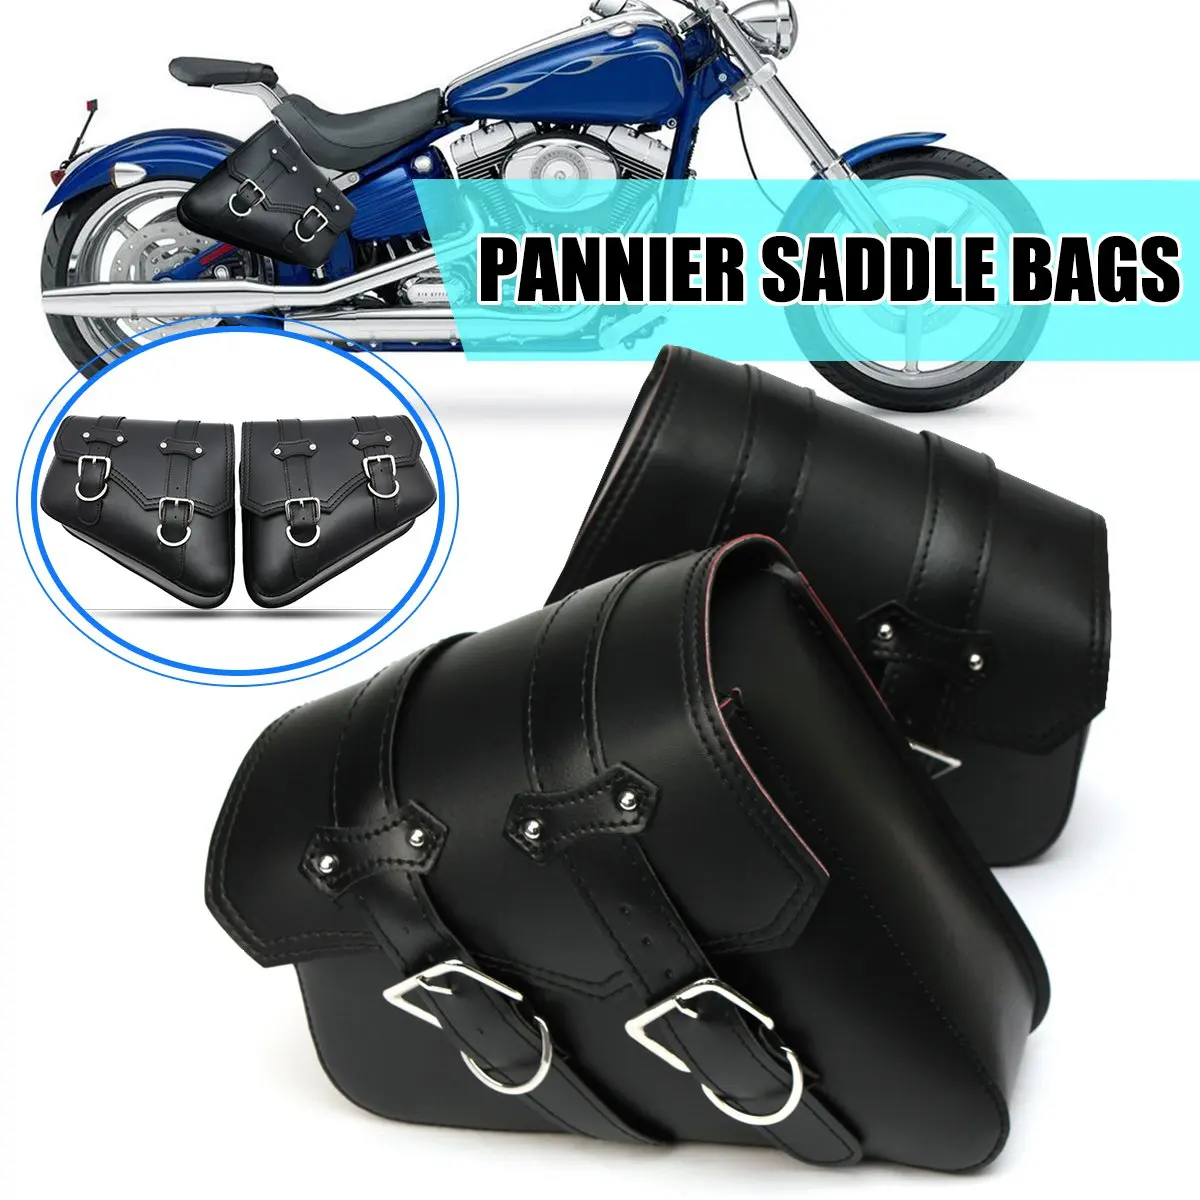 

2pcs Universal Motorcycle Saddlebags PU Leather Storage Tool Pouch Luggage Side Bag For Harley Davidson Cruiser